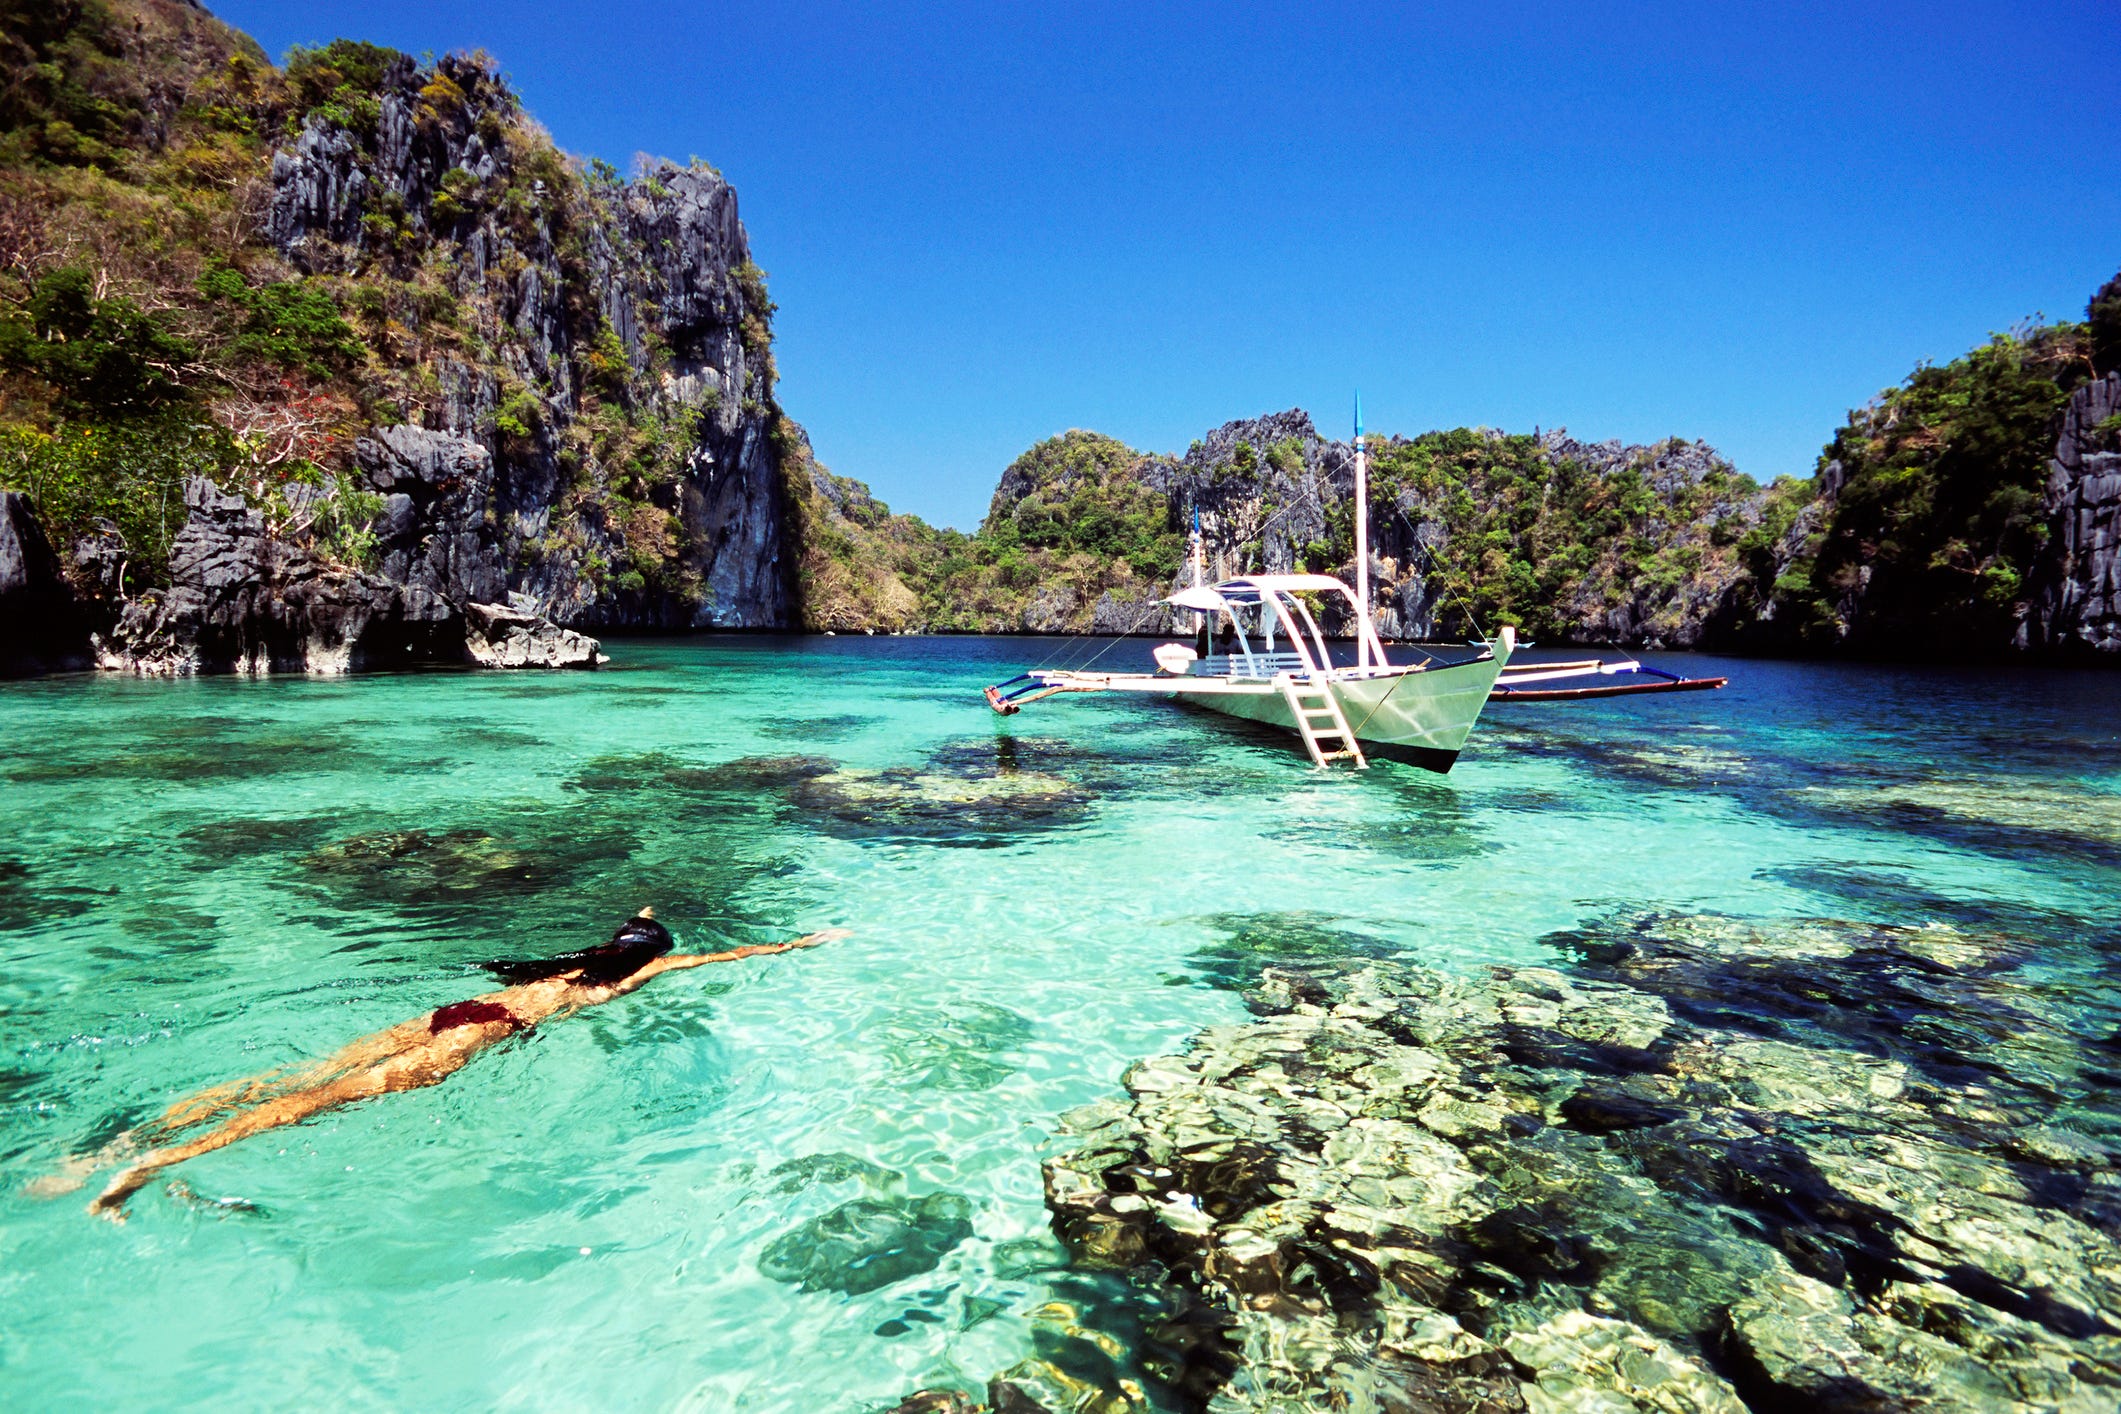 Photos Show Why Palawan In The Philippines Has Just Been Named The Best Island In The World